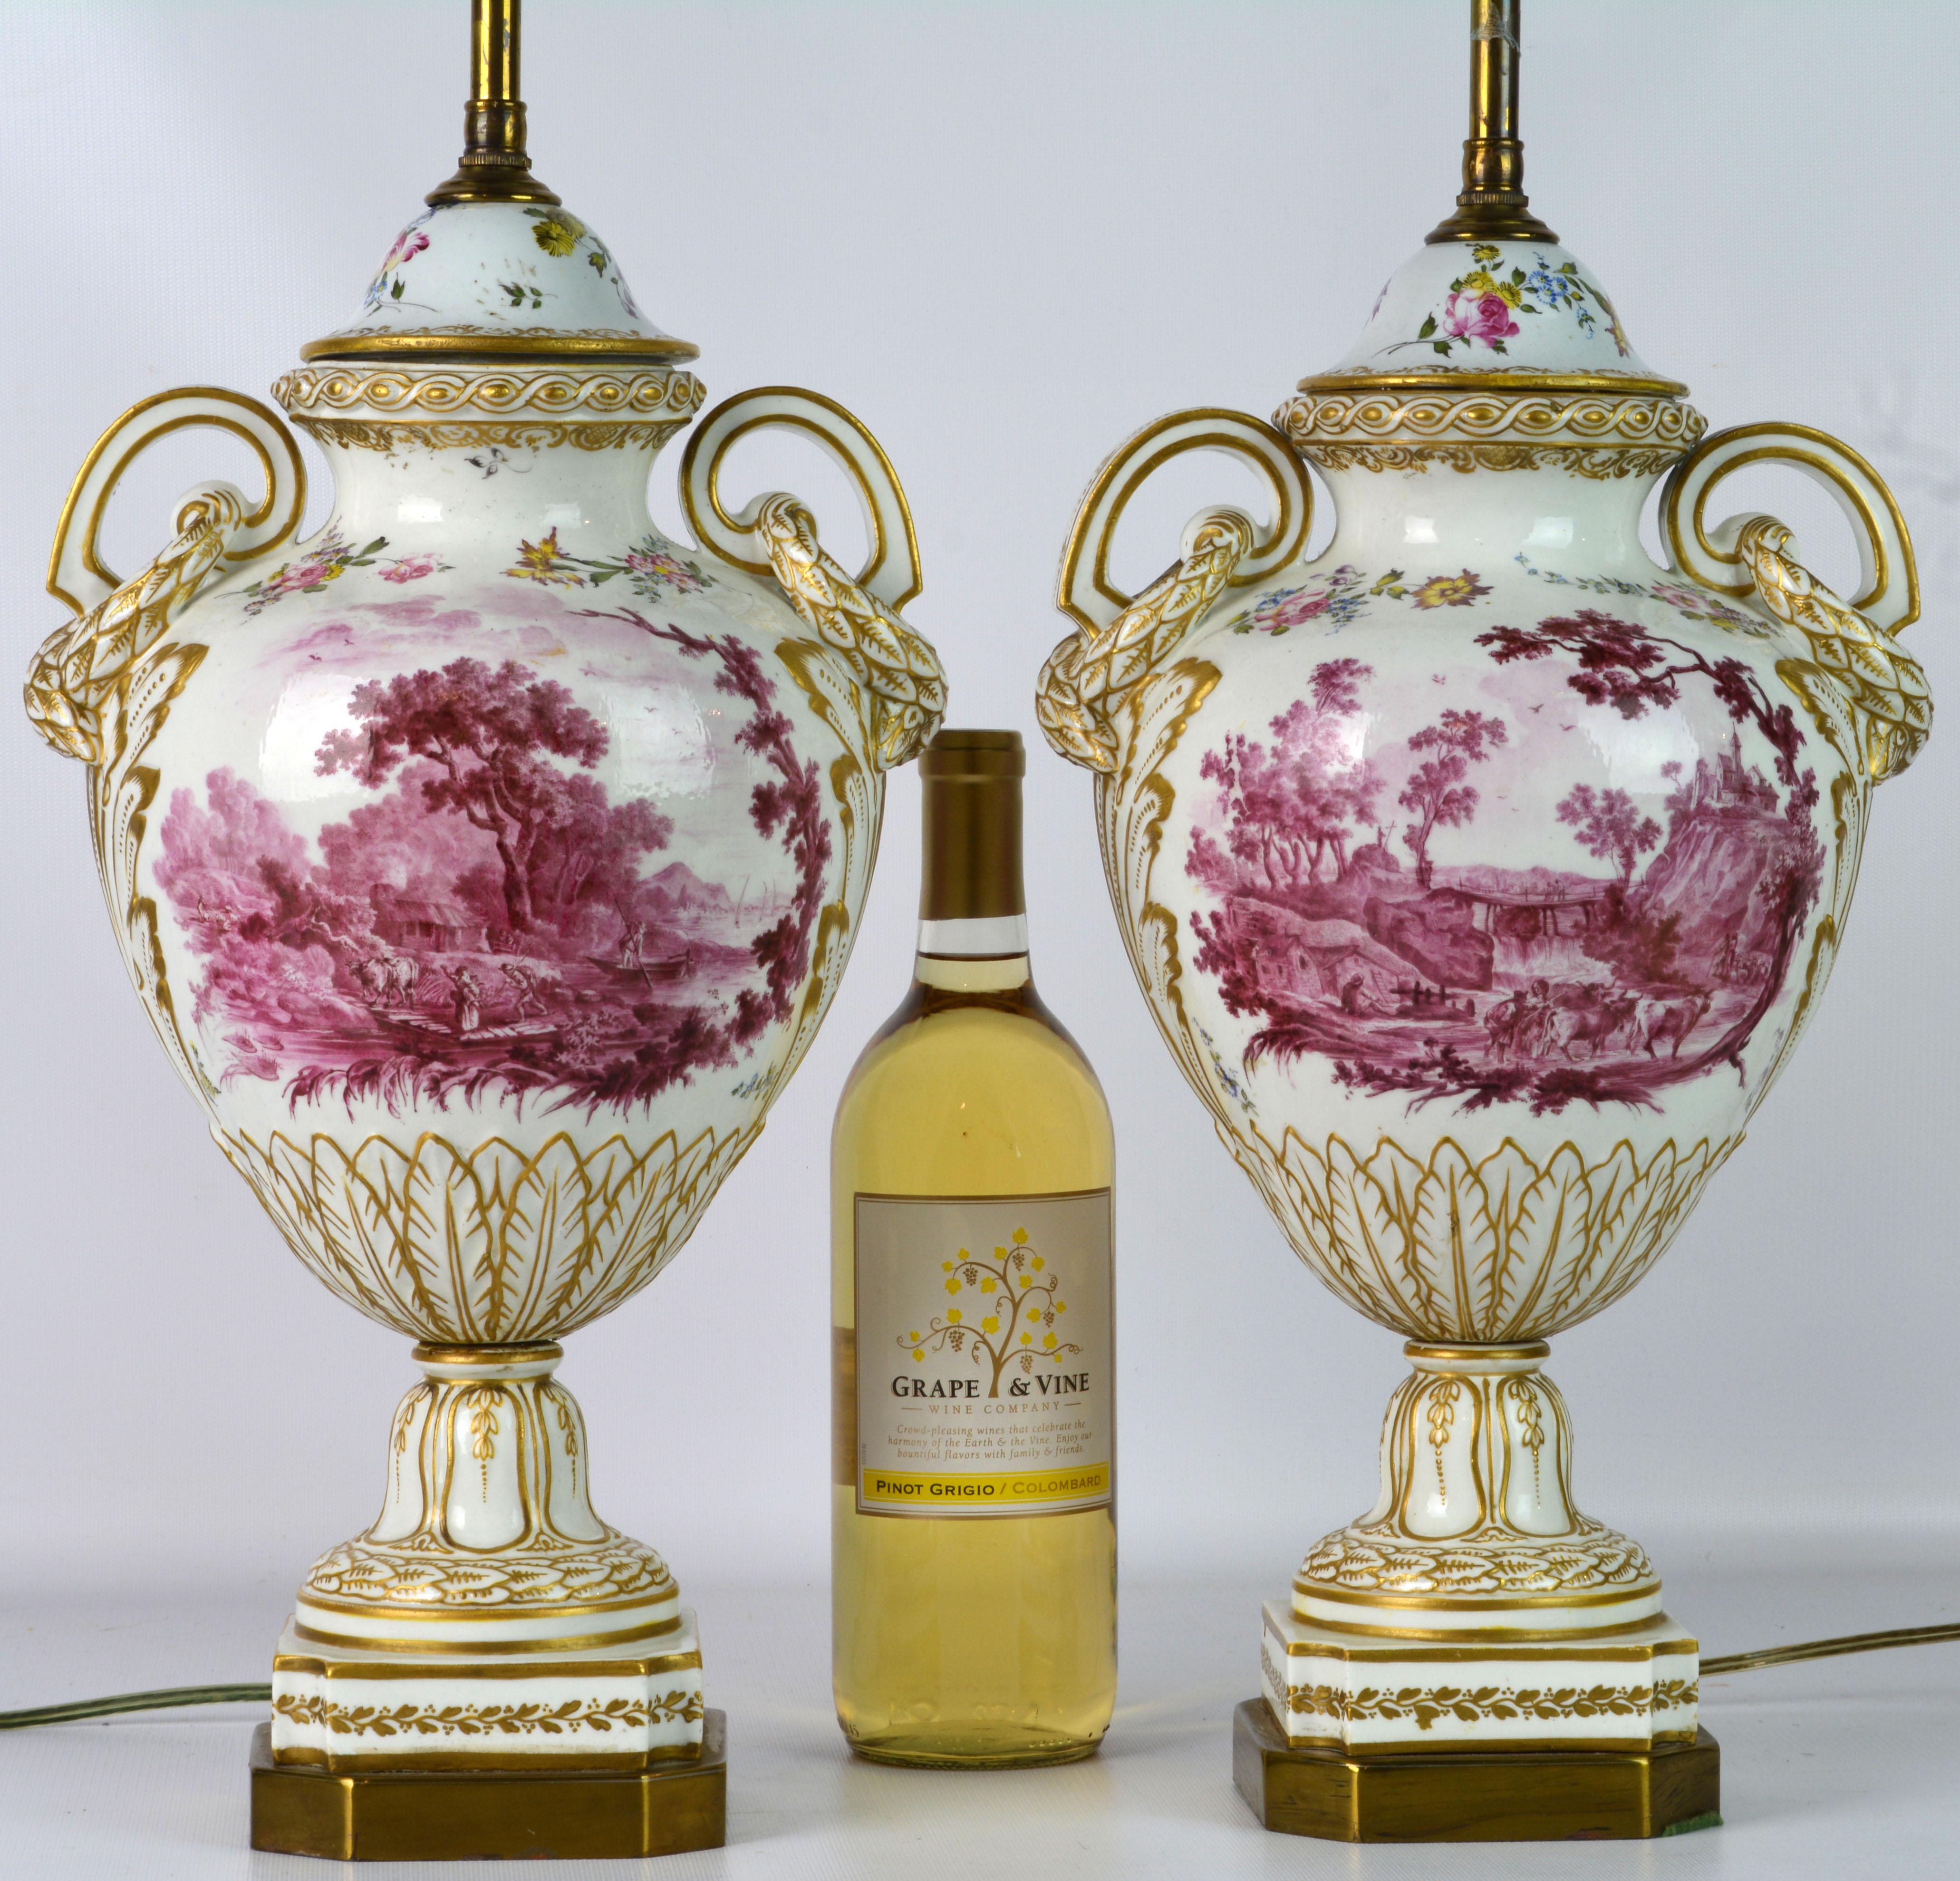 These large French old Paris porcelain lamps feature purple 'puce camaieu' landscape paintings on both sides set on gilt decorated white ground. The form is typical for the Louis XVI style and features elegant laurel draped scrolled handles. The